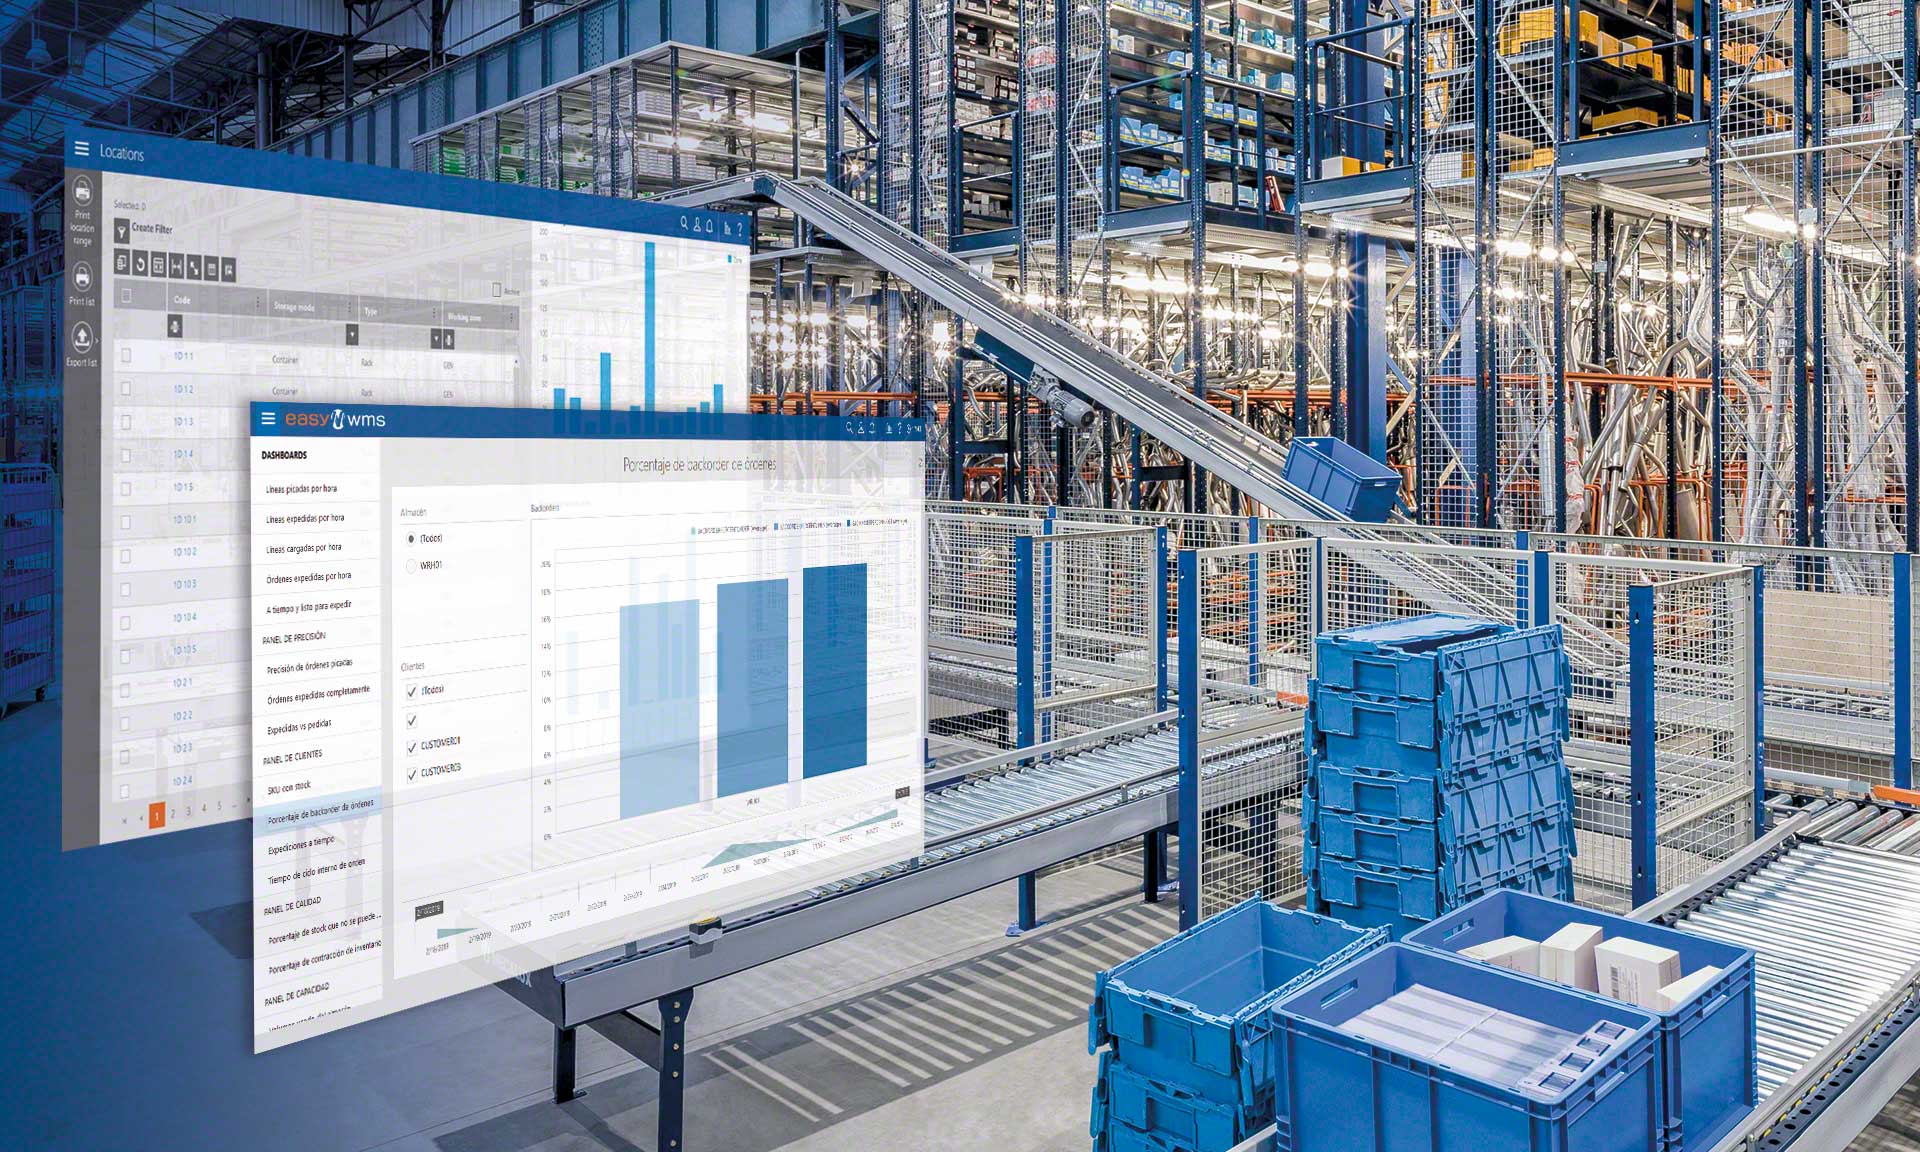 In logistics, hyperautomation consists of digitizing management of the supply chain